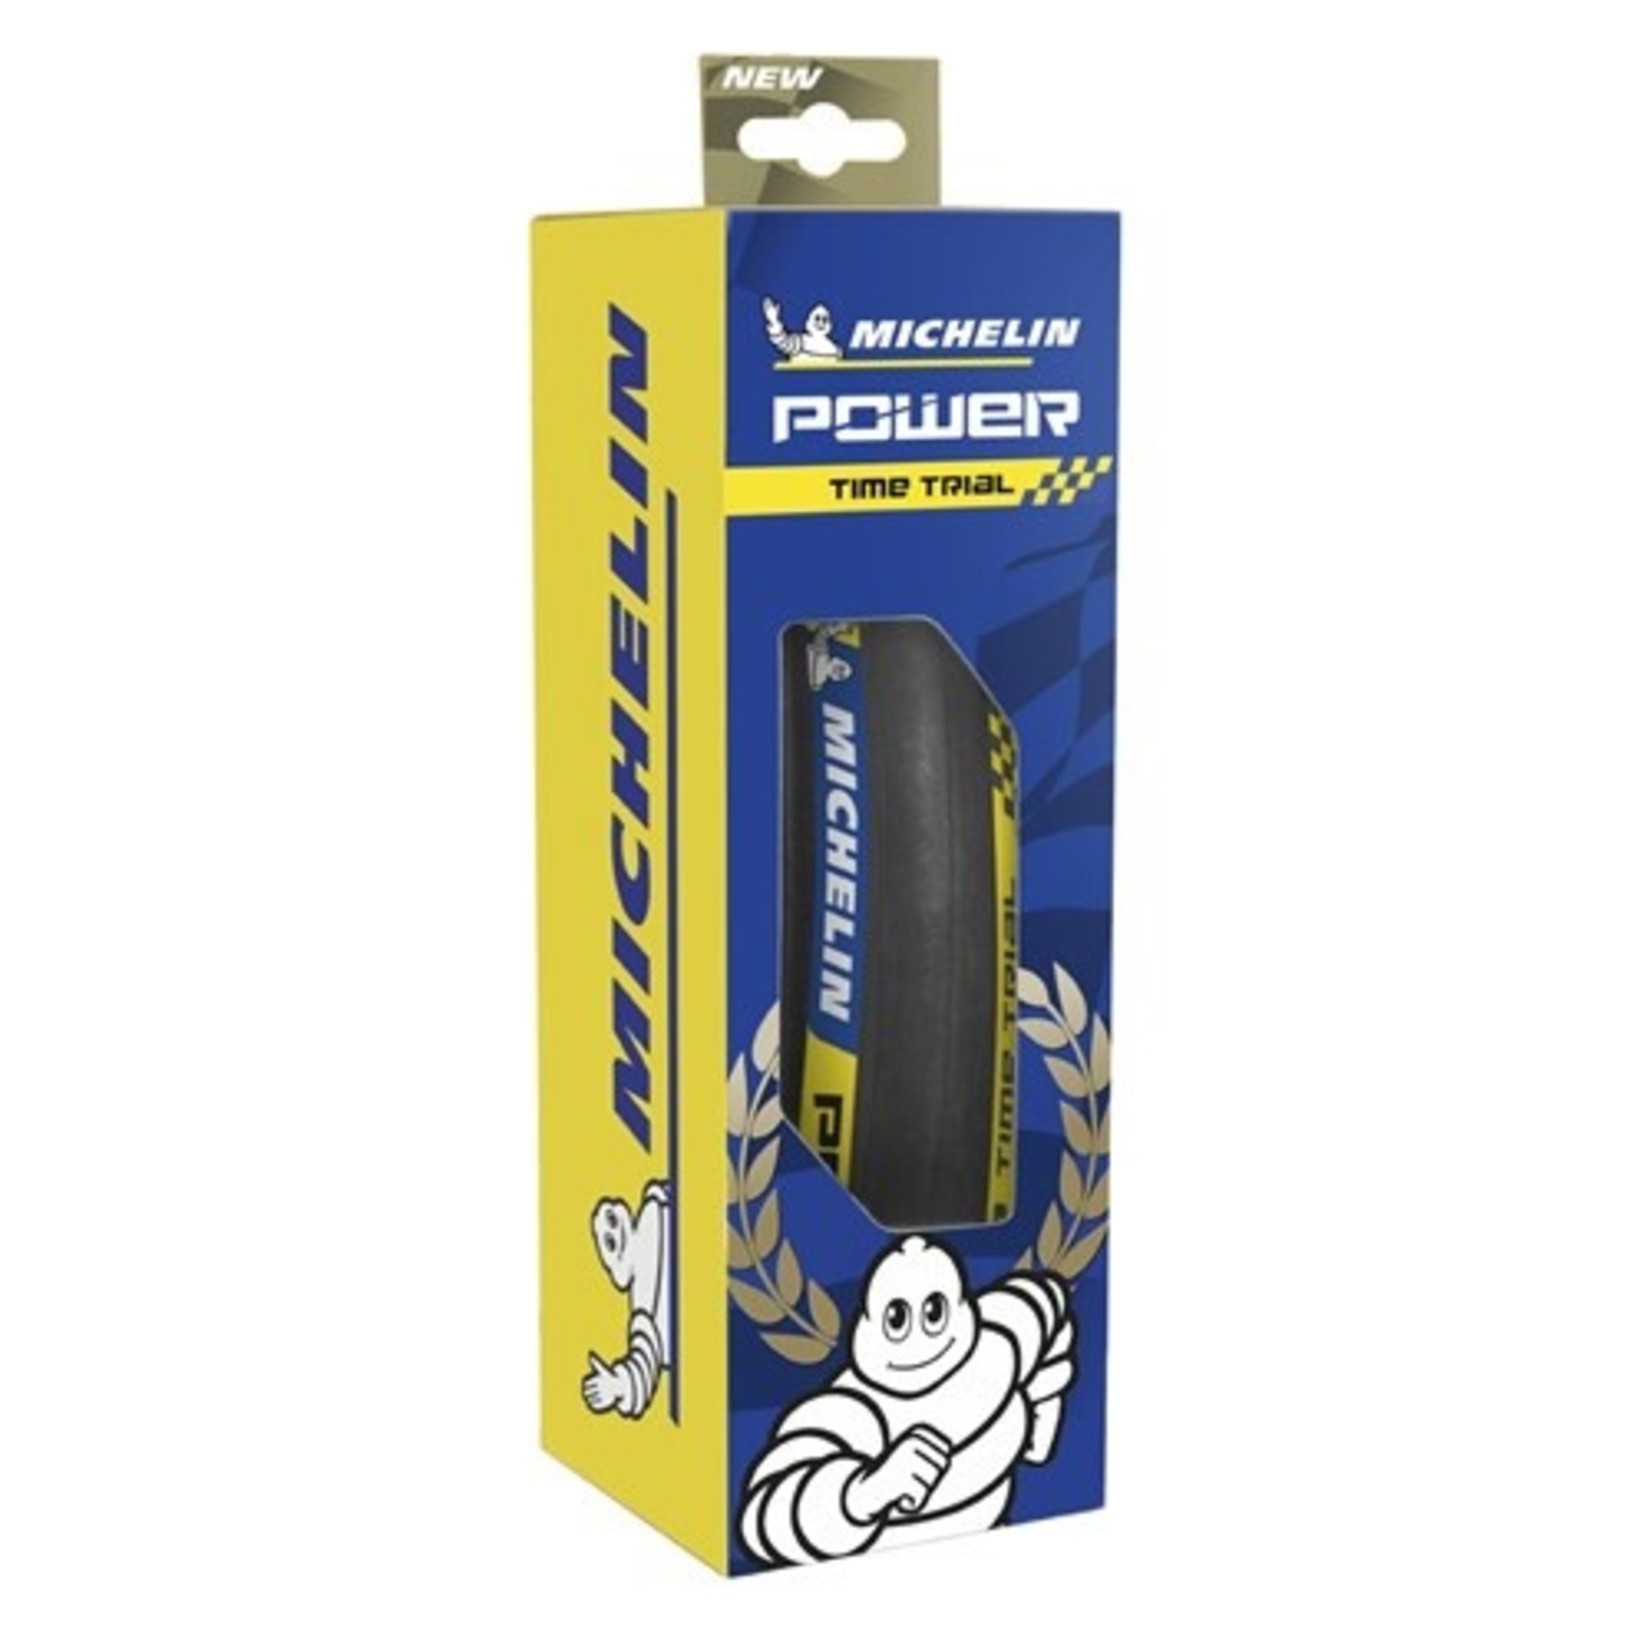 Michelin Michelin Bike Tyre - Power Road Time Trial - 700 X 23C - Foldable Bicycle Tyre